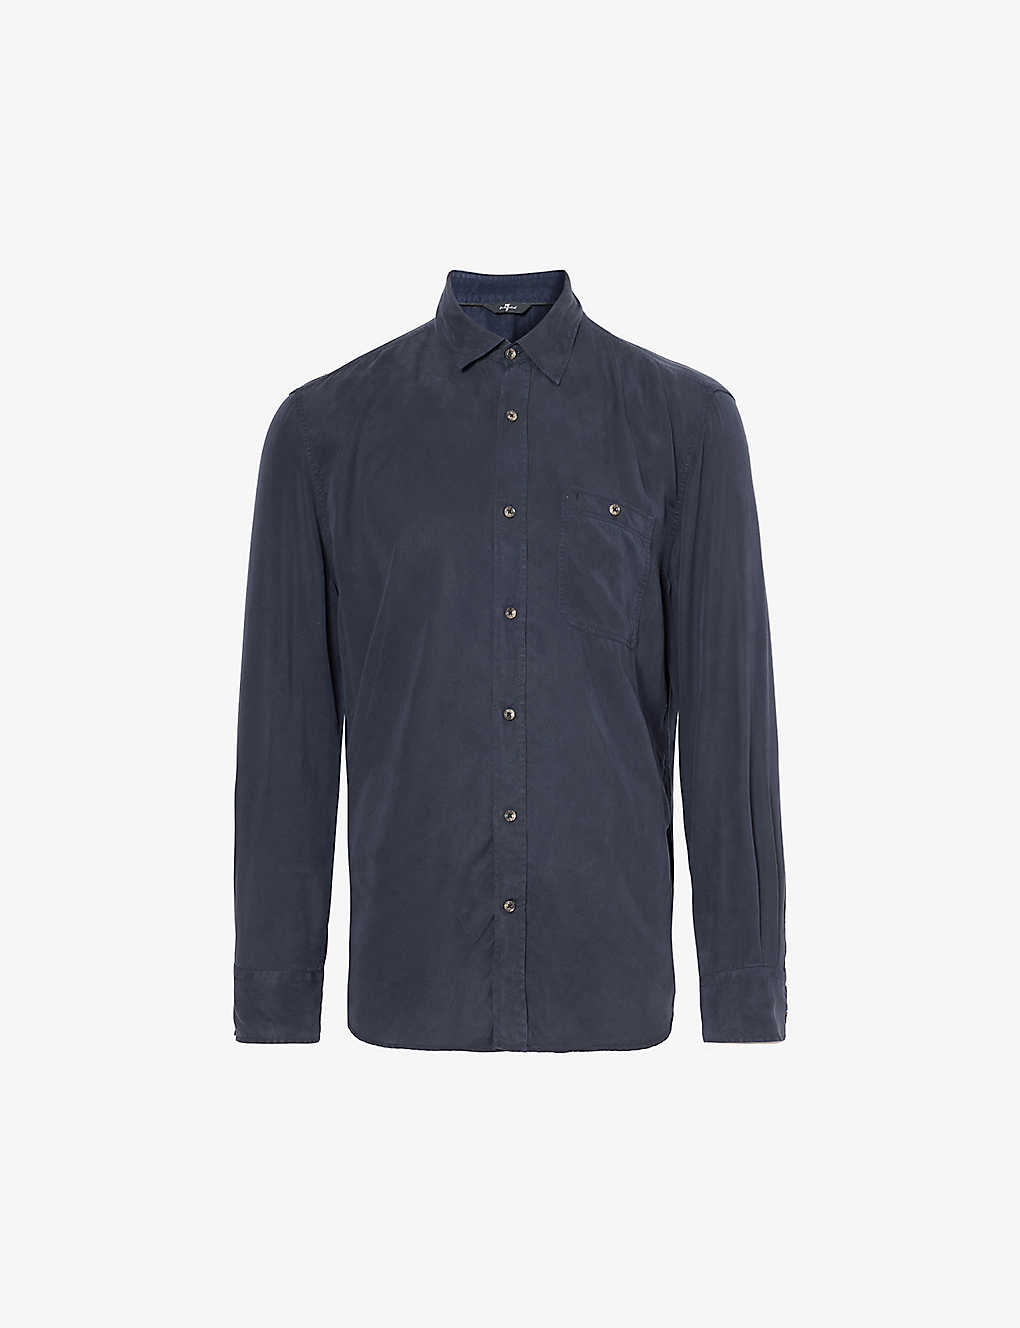 7 For All Mankind Mens Blue Chest-pocket Long-sleeved Woven Shirt